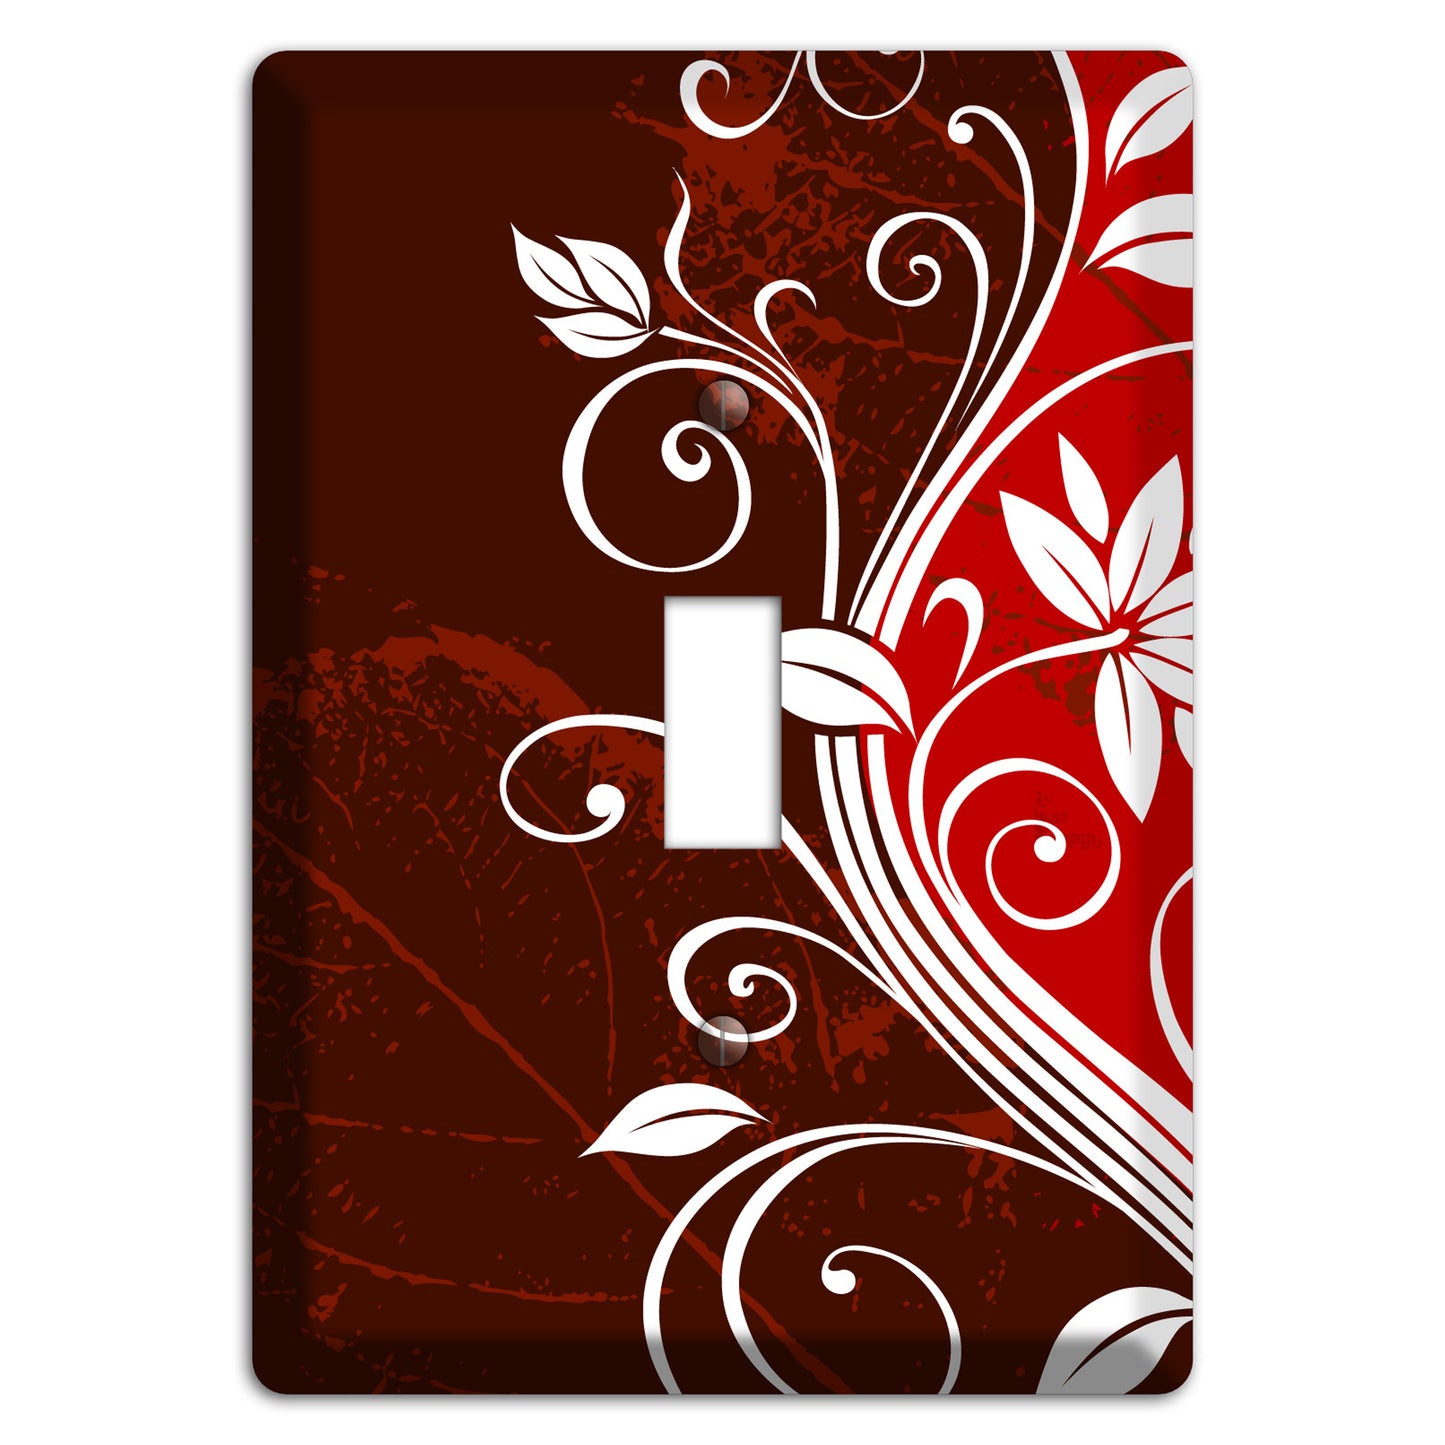 Burgundy and Red Deco Floral Cover Plates